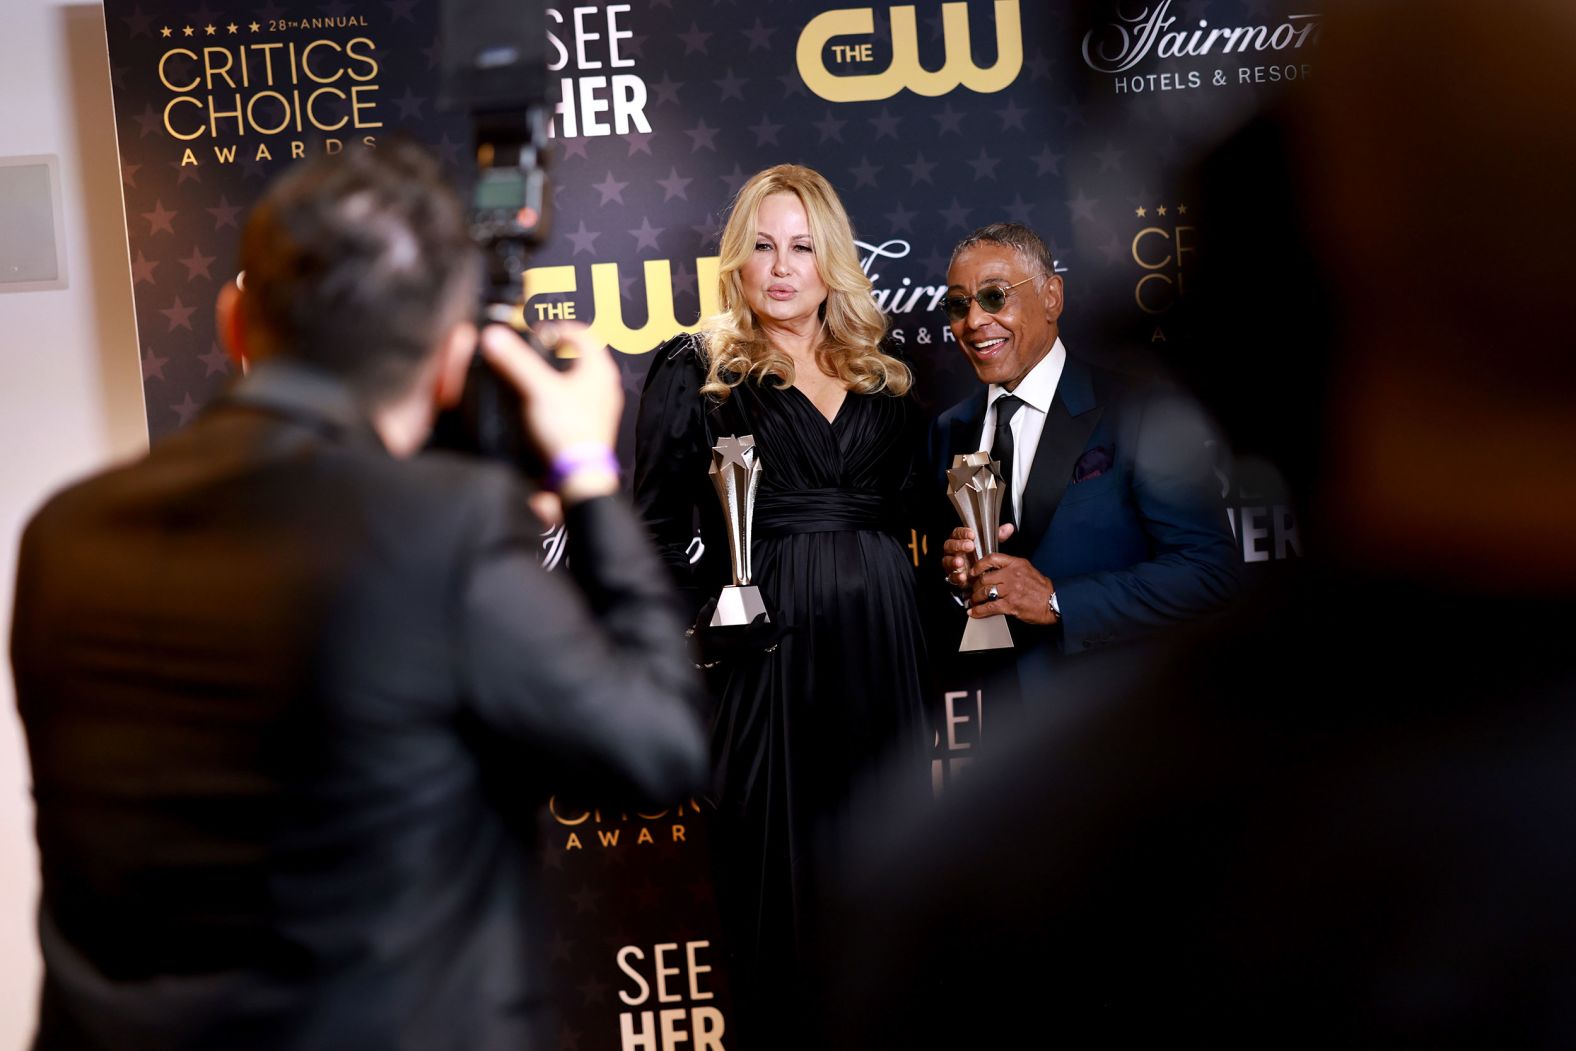 Actors Jennifer Coolidge and Giancarlo Esposito pose with their statuettes at the <a href="https://www.cnn.com/style/article/red-carpet-critics-choice-2023/index.html" target="_blank">Critics Choice Awards</a> in Los Angeles, California, on Sunday, January 15. Coolidge took home the award for best supporting actress in a drama series for her role in "The White Lotus" and Esposito won for best supporting actor in a drama series for his part in "Better Call Saul."